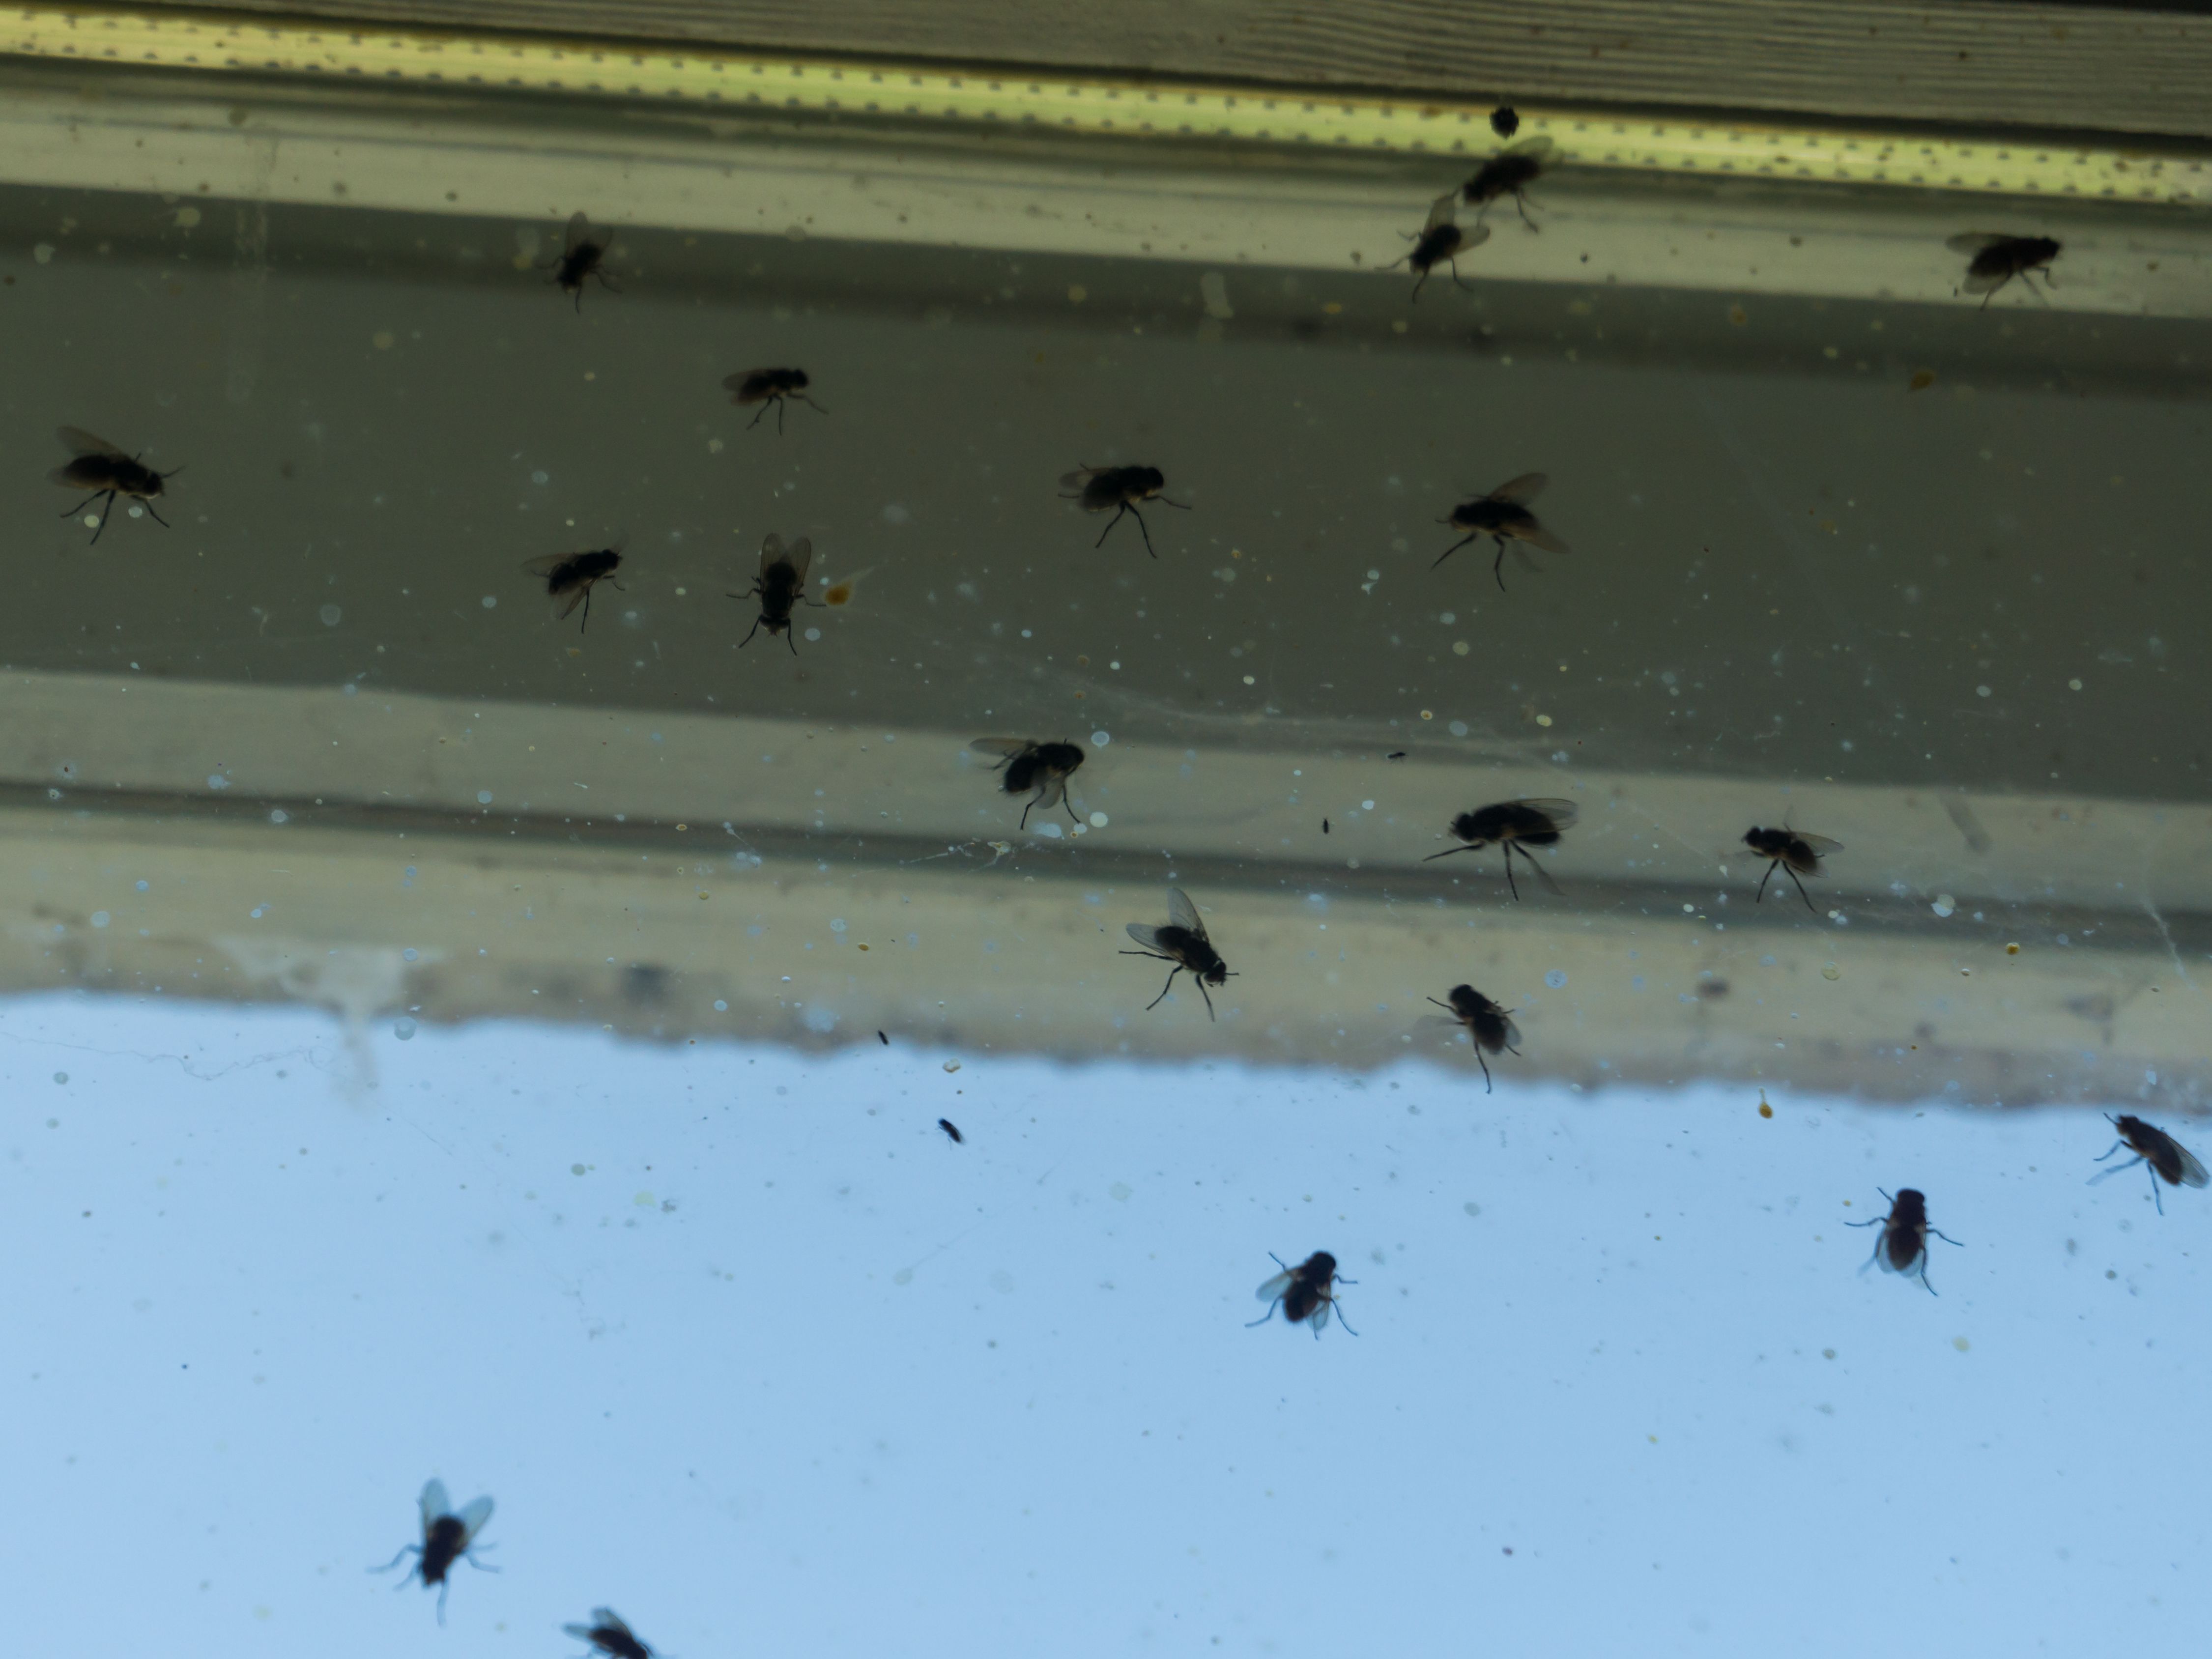 Dirty Window Covered With Flies And Other Insects Royalty Free Image 1594592358 